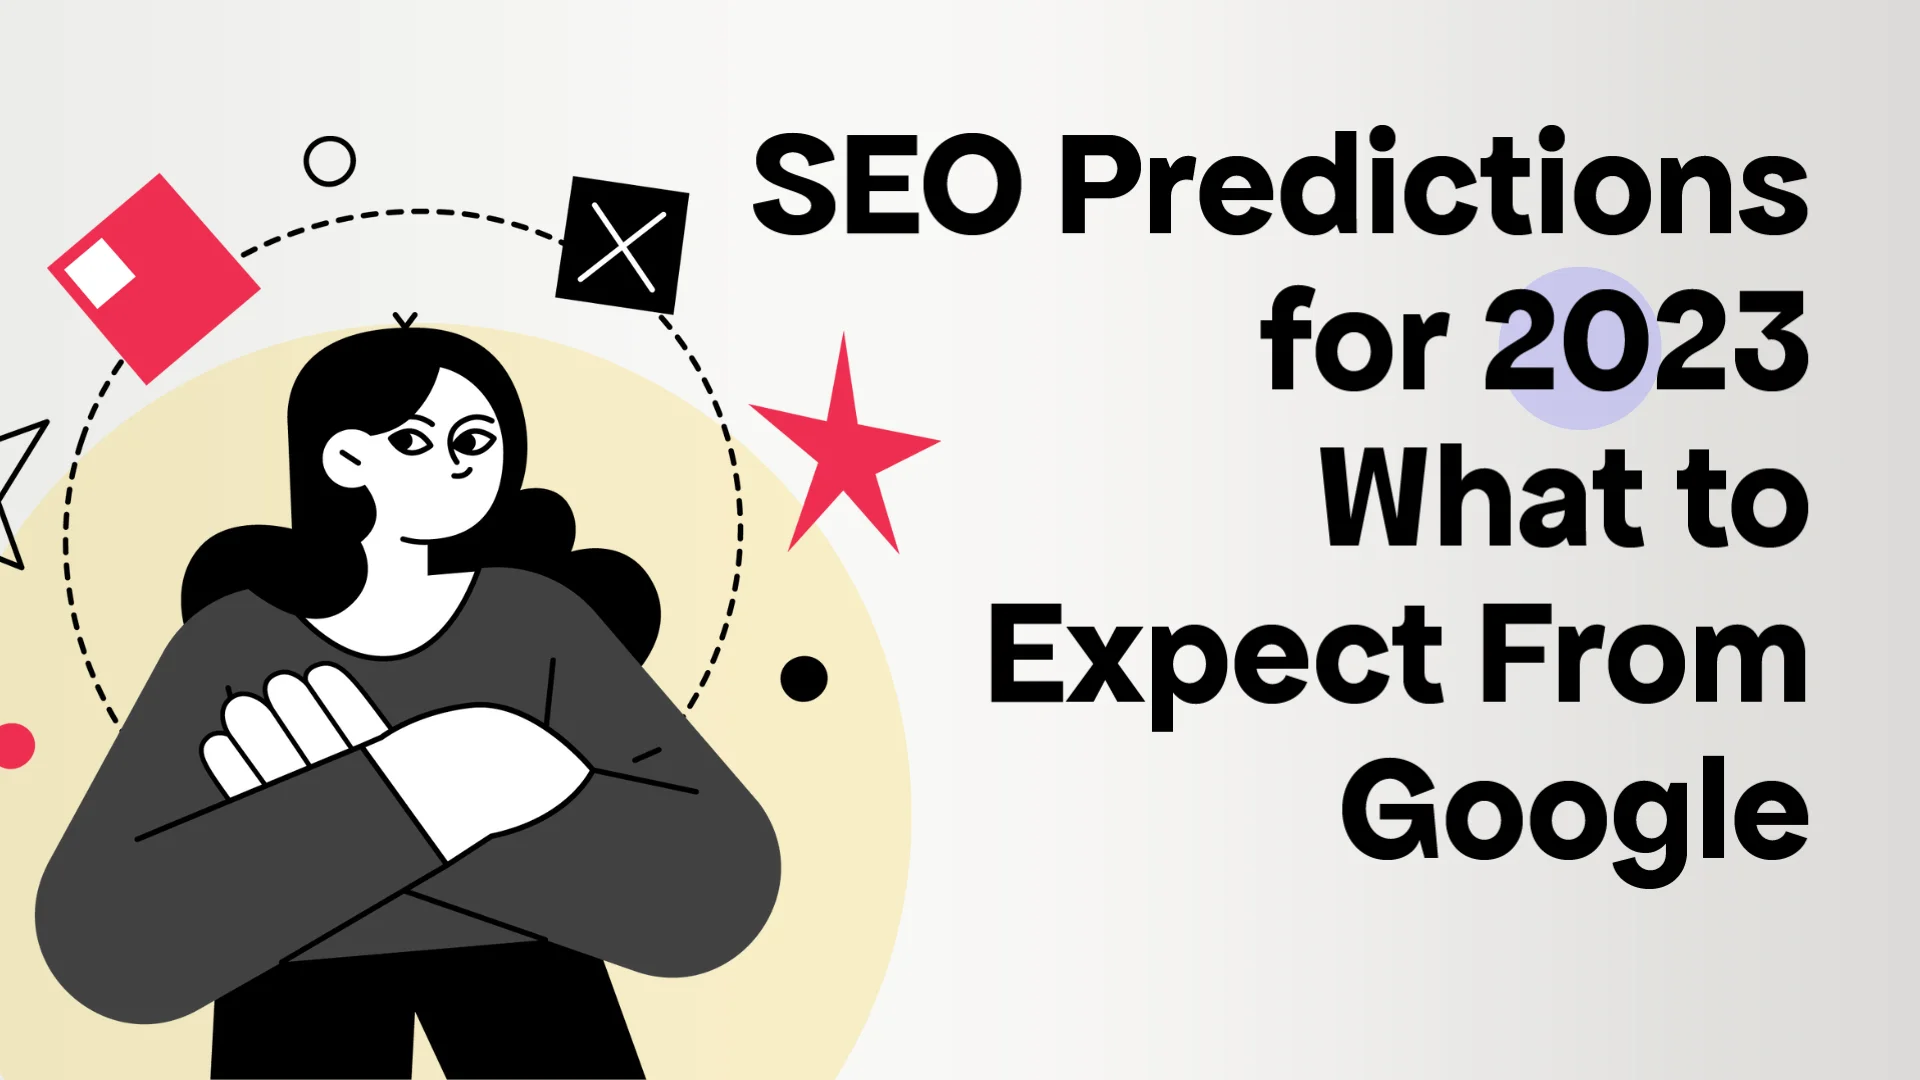 Seo predictions for 2023 featured Image